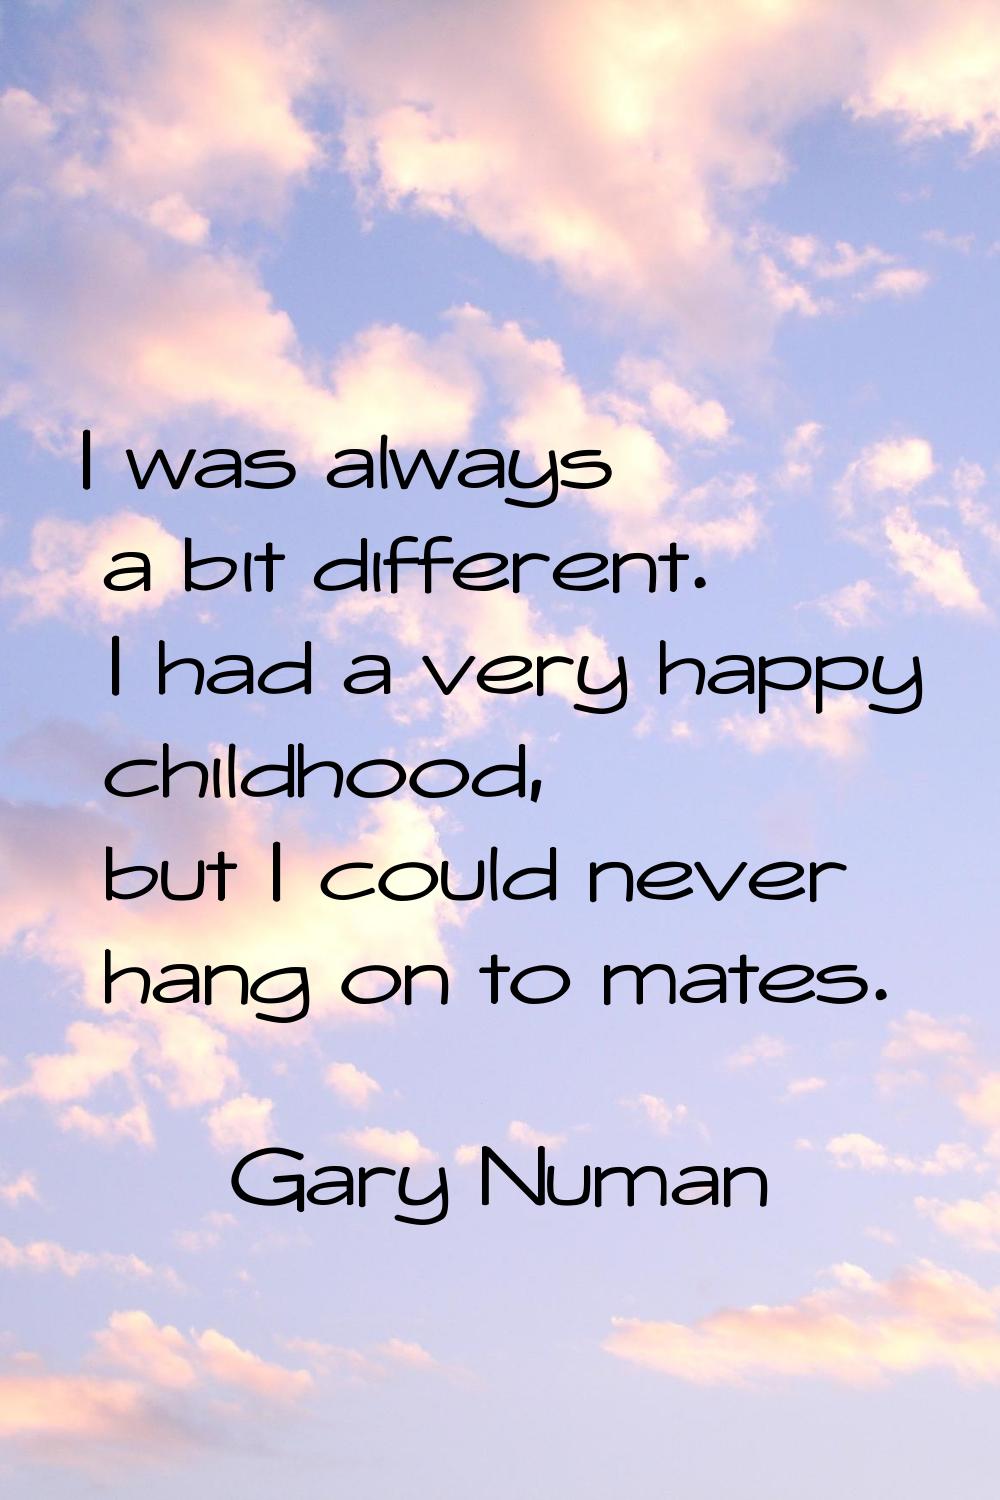 I was always a bit different. I had a very happy childhood, but I could never hang on to mates.